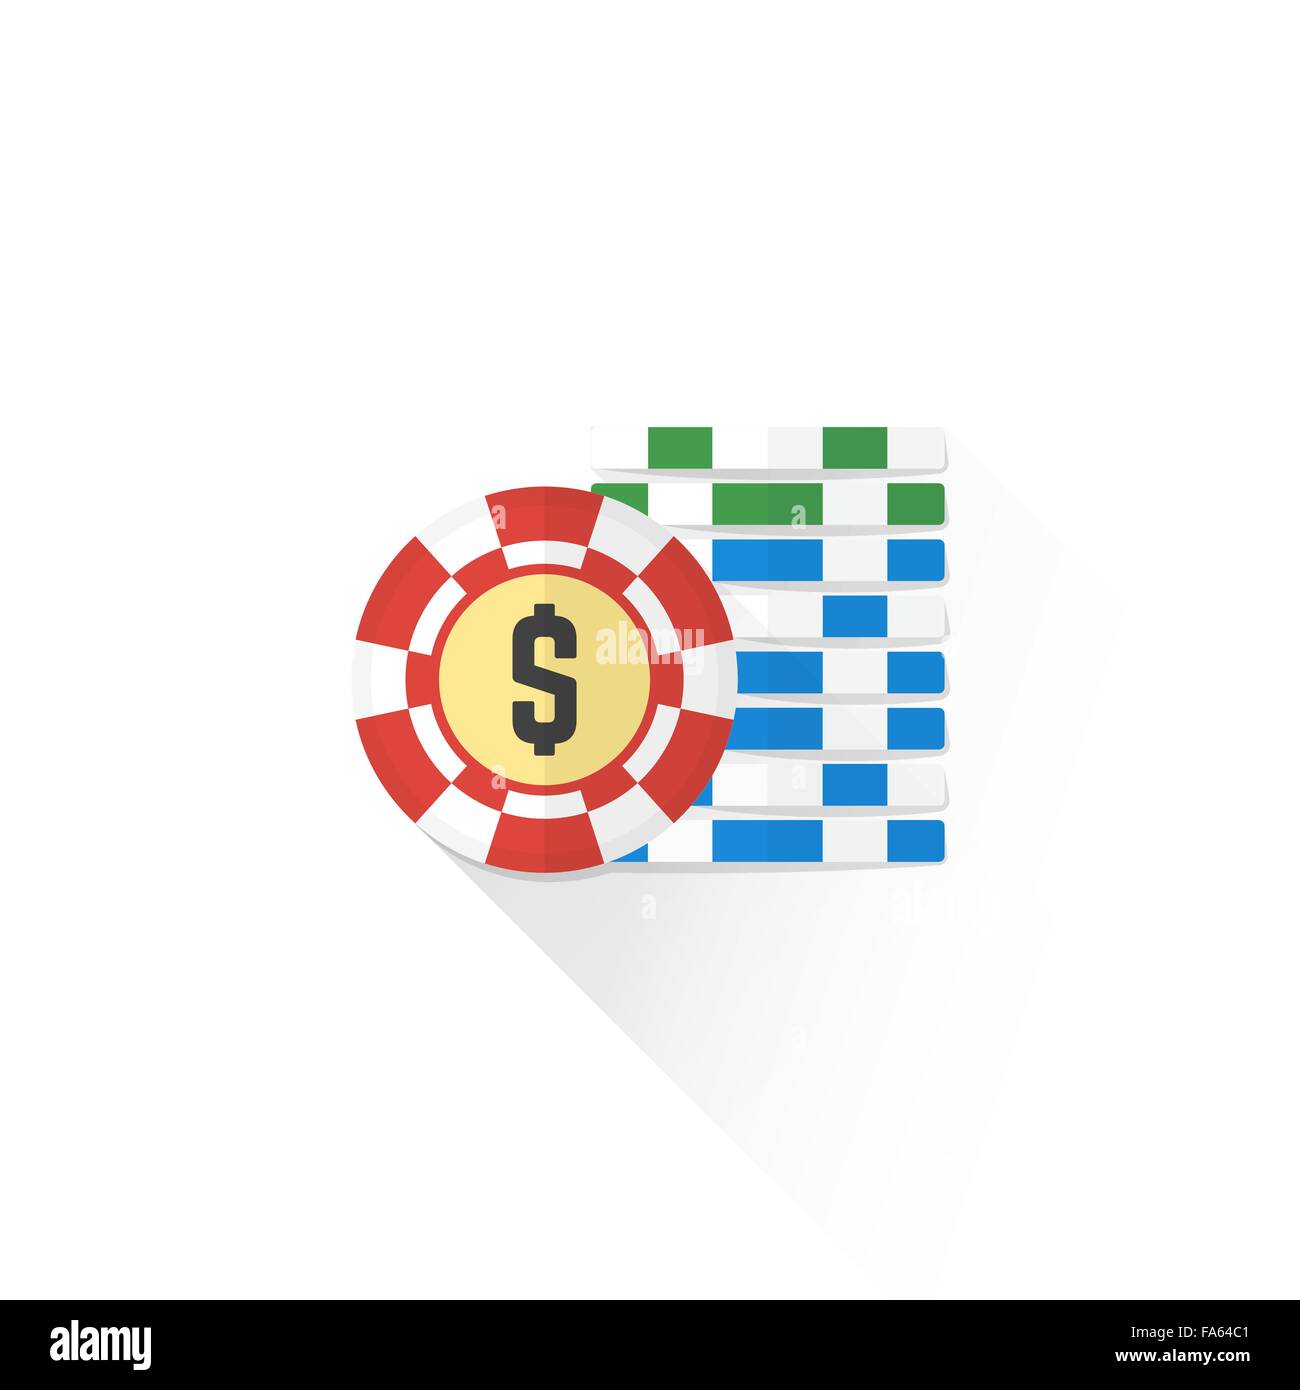 vector casino gambling chips red green blue color dollar sign isolated flat design illustration on white background with shadow Stock Vector